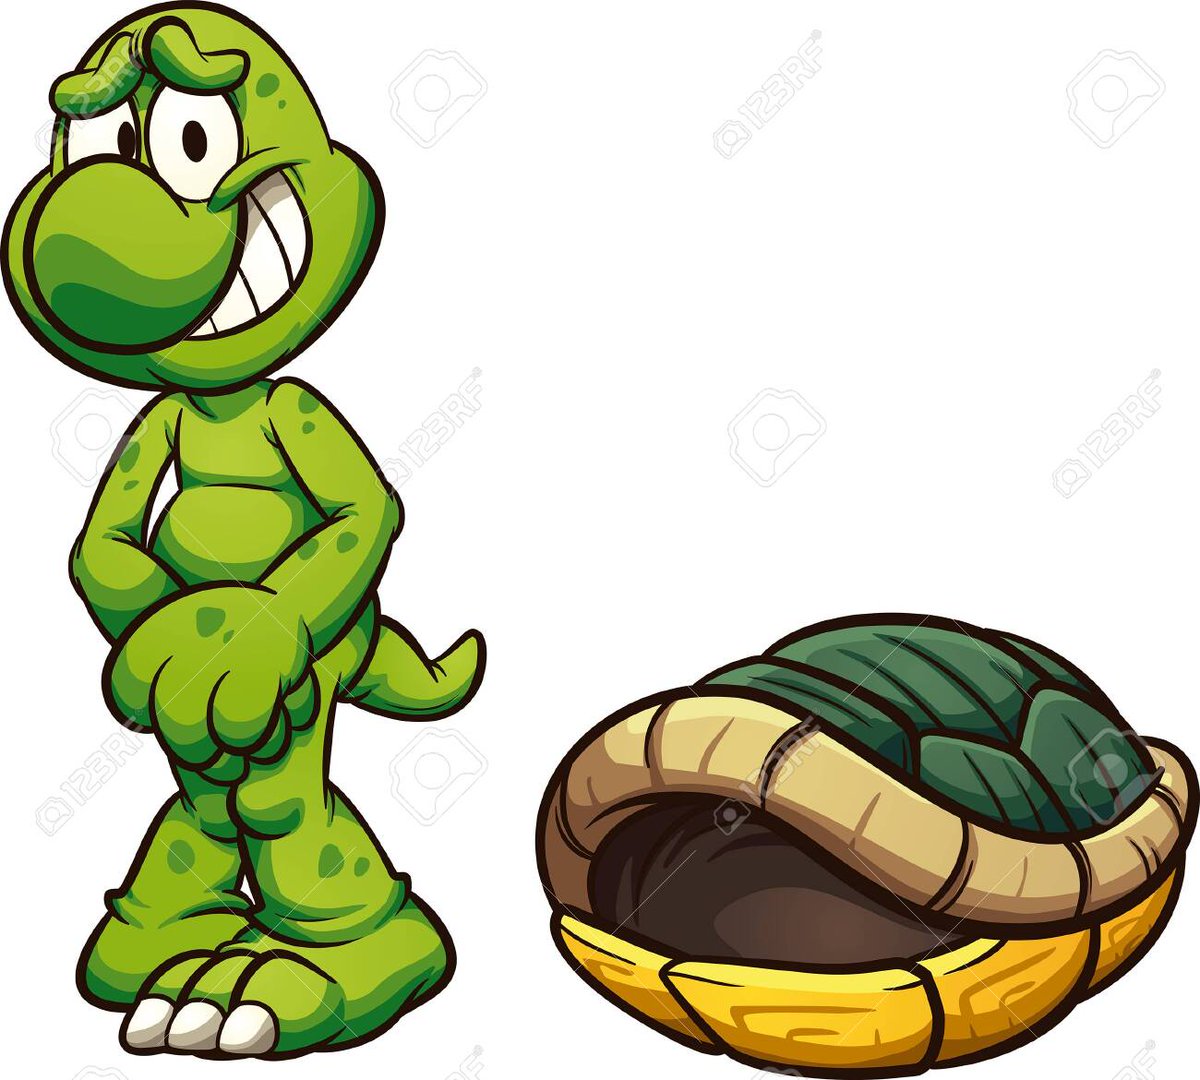 S/O to cartoons and stock image sites for ruining our collective turtle anatomy knowledge for years to come